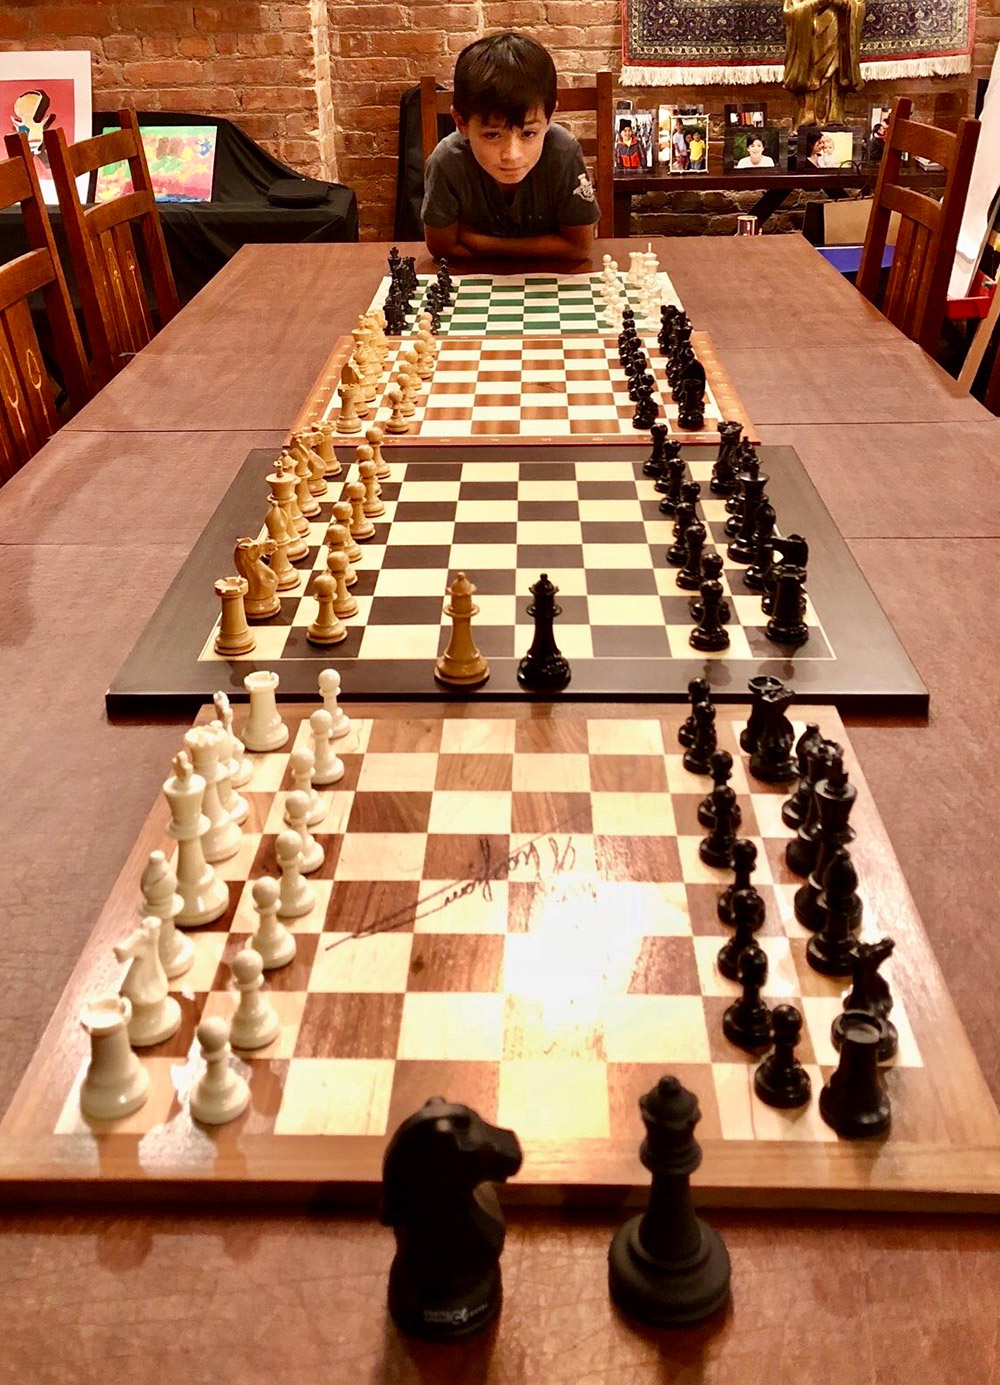 Oliver, at home in New York City, displays his collection of chess boards. His favorites include a board signed by World Chess Champion Garry Kasparov and another autographed by the U.S. Chess Champion Fabiano Caruana. September, 2018